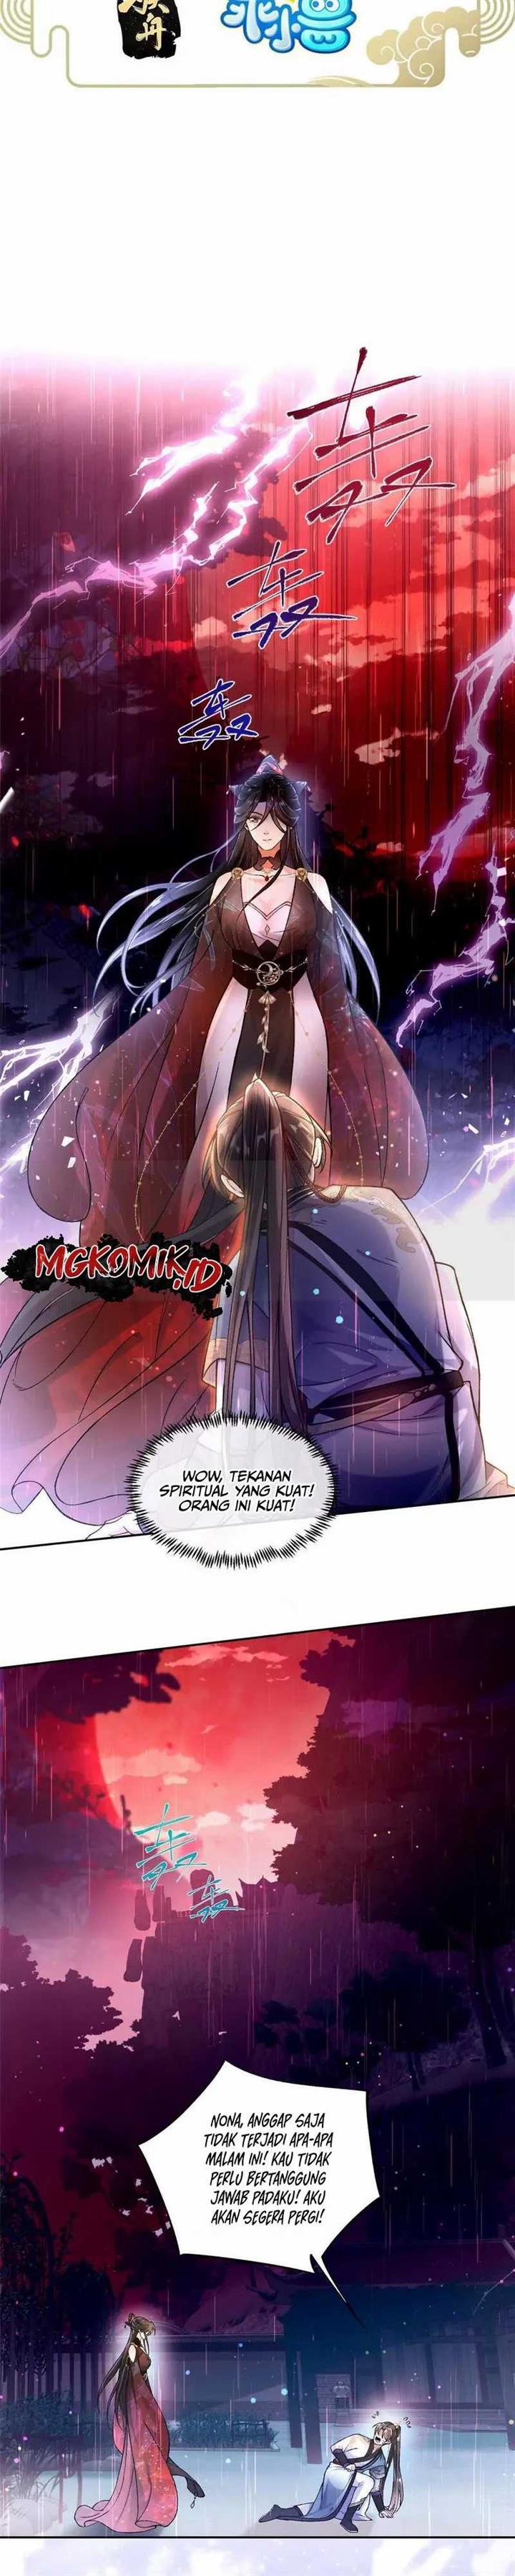 Stuck by the Demoness’s Side Chapter 2